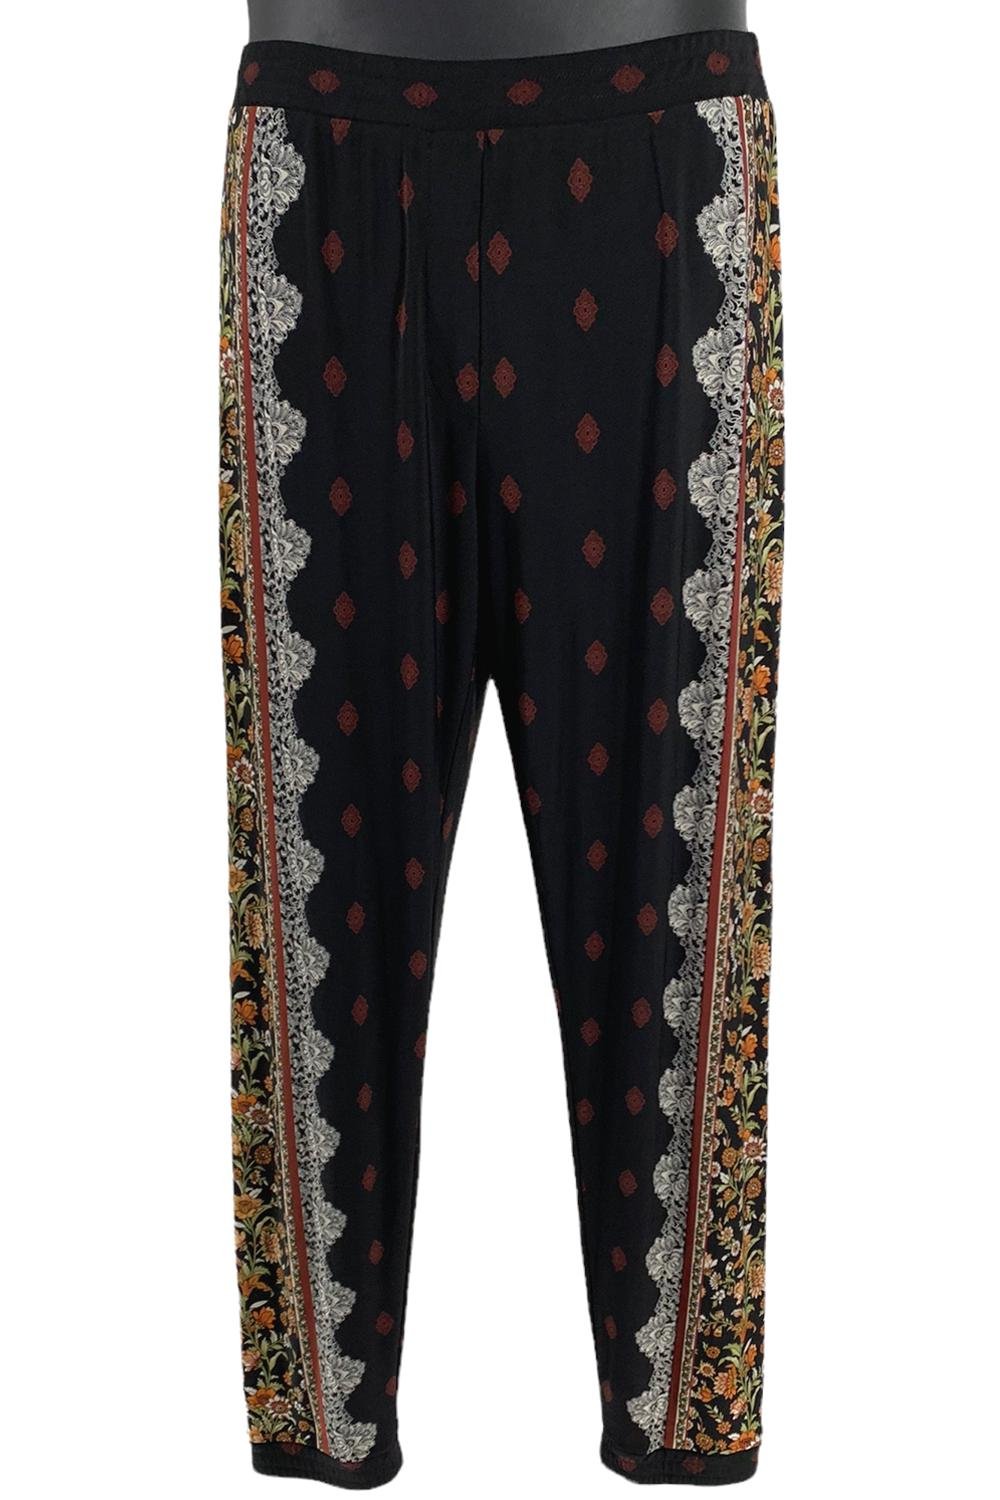 Susan Graver Printed Knit Pull-On Joggers Black